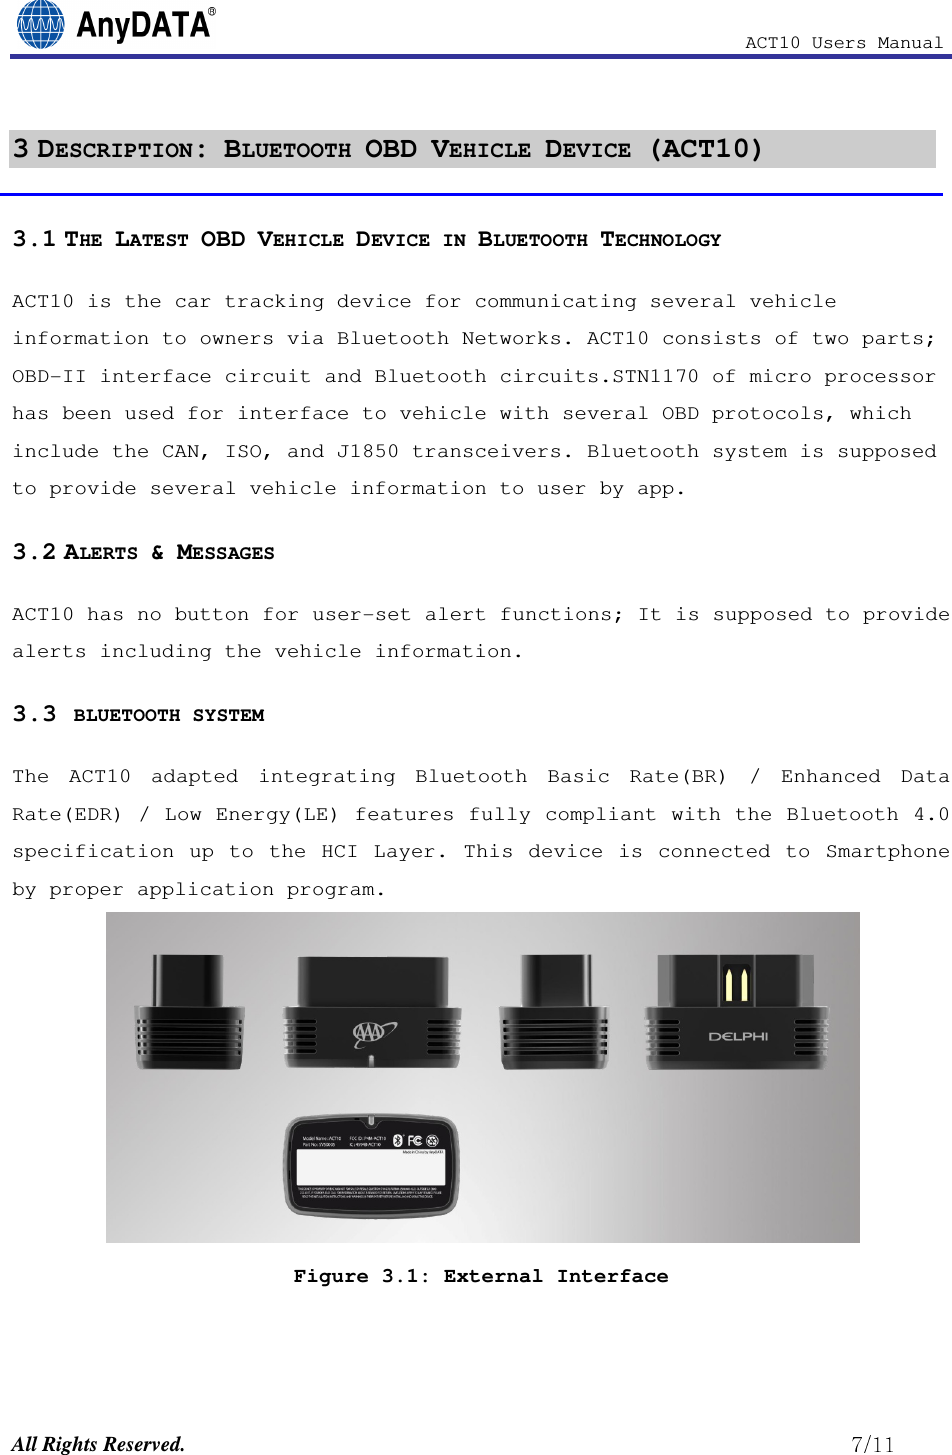                                                            ACT10 Users Manual  All Rights Reserved.                                                          3 DESCRIPTION: BLUETOOTH OBD VEHICLE DEVICE (ACT10) 3.1 THE LATEST OBD VEHICLE DEVICE IN BLUETOOTH TECHNOLOGY ACT10 is the car tracking device for communicating several vehicle information to owners via Bluetooth Networks. ACT10 consists of two parts; OBD-II interface circuit and Bluetooth circuits.STN1170 of micro processor has been used for interface to vehicle with several OBD protocols, which include the CAN, ISO, and J1850 transceivers. Bluetooth system is supposed to provide several vehicle information to user by app.  3.2 ALERTS &amp; MESSAGES  ACT10 has no button for user-set alert functions; It is supposed to provide alerts including the vehicle information. 3.3  BLUETOOTH SYSTEM  The  ACT10  adapted  integrating  Bluetooth  Basic  Rate(BR)  /  Enhanced  Data Rate(EDR) / Low Energy(LE) features fully compliant with the Bluetooth 4.0 specification  up  to  the  HCI  Layer.  This  device  is  connected  to  Smartphone by proper application program.    Figure 3.1: External Interface 